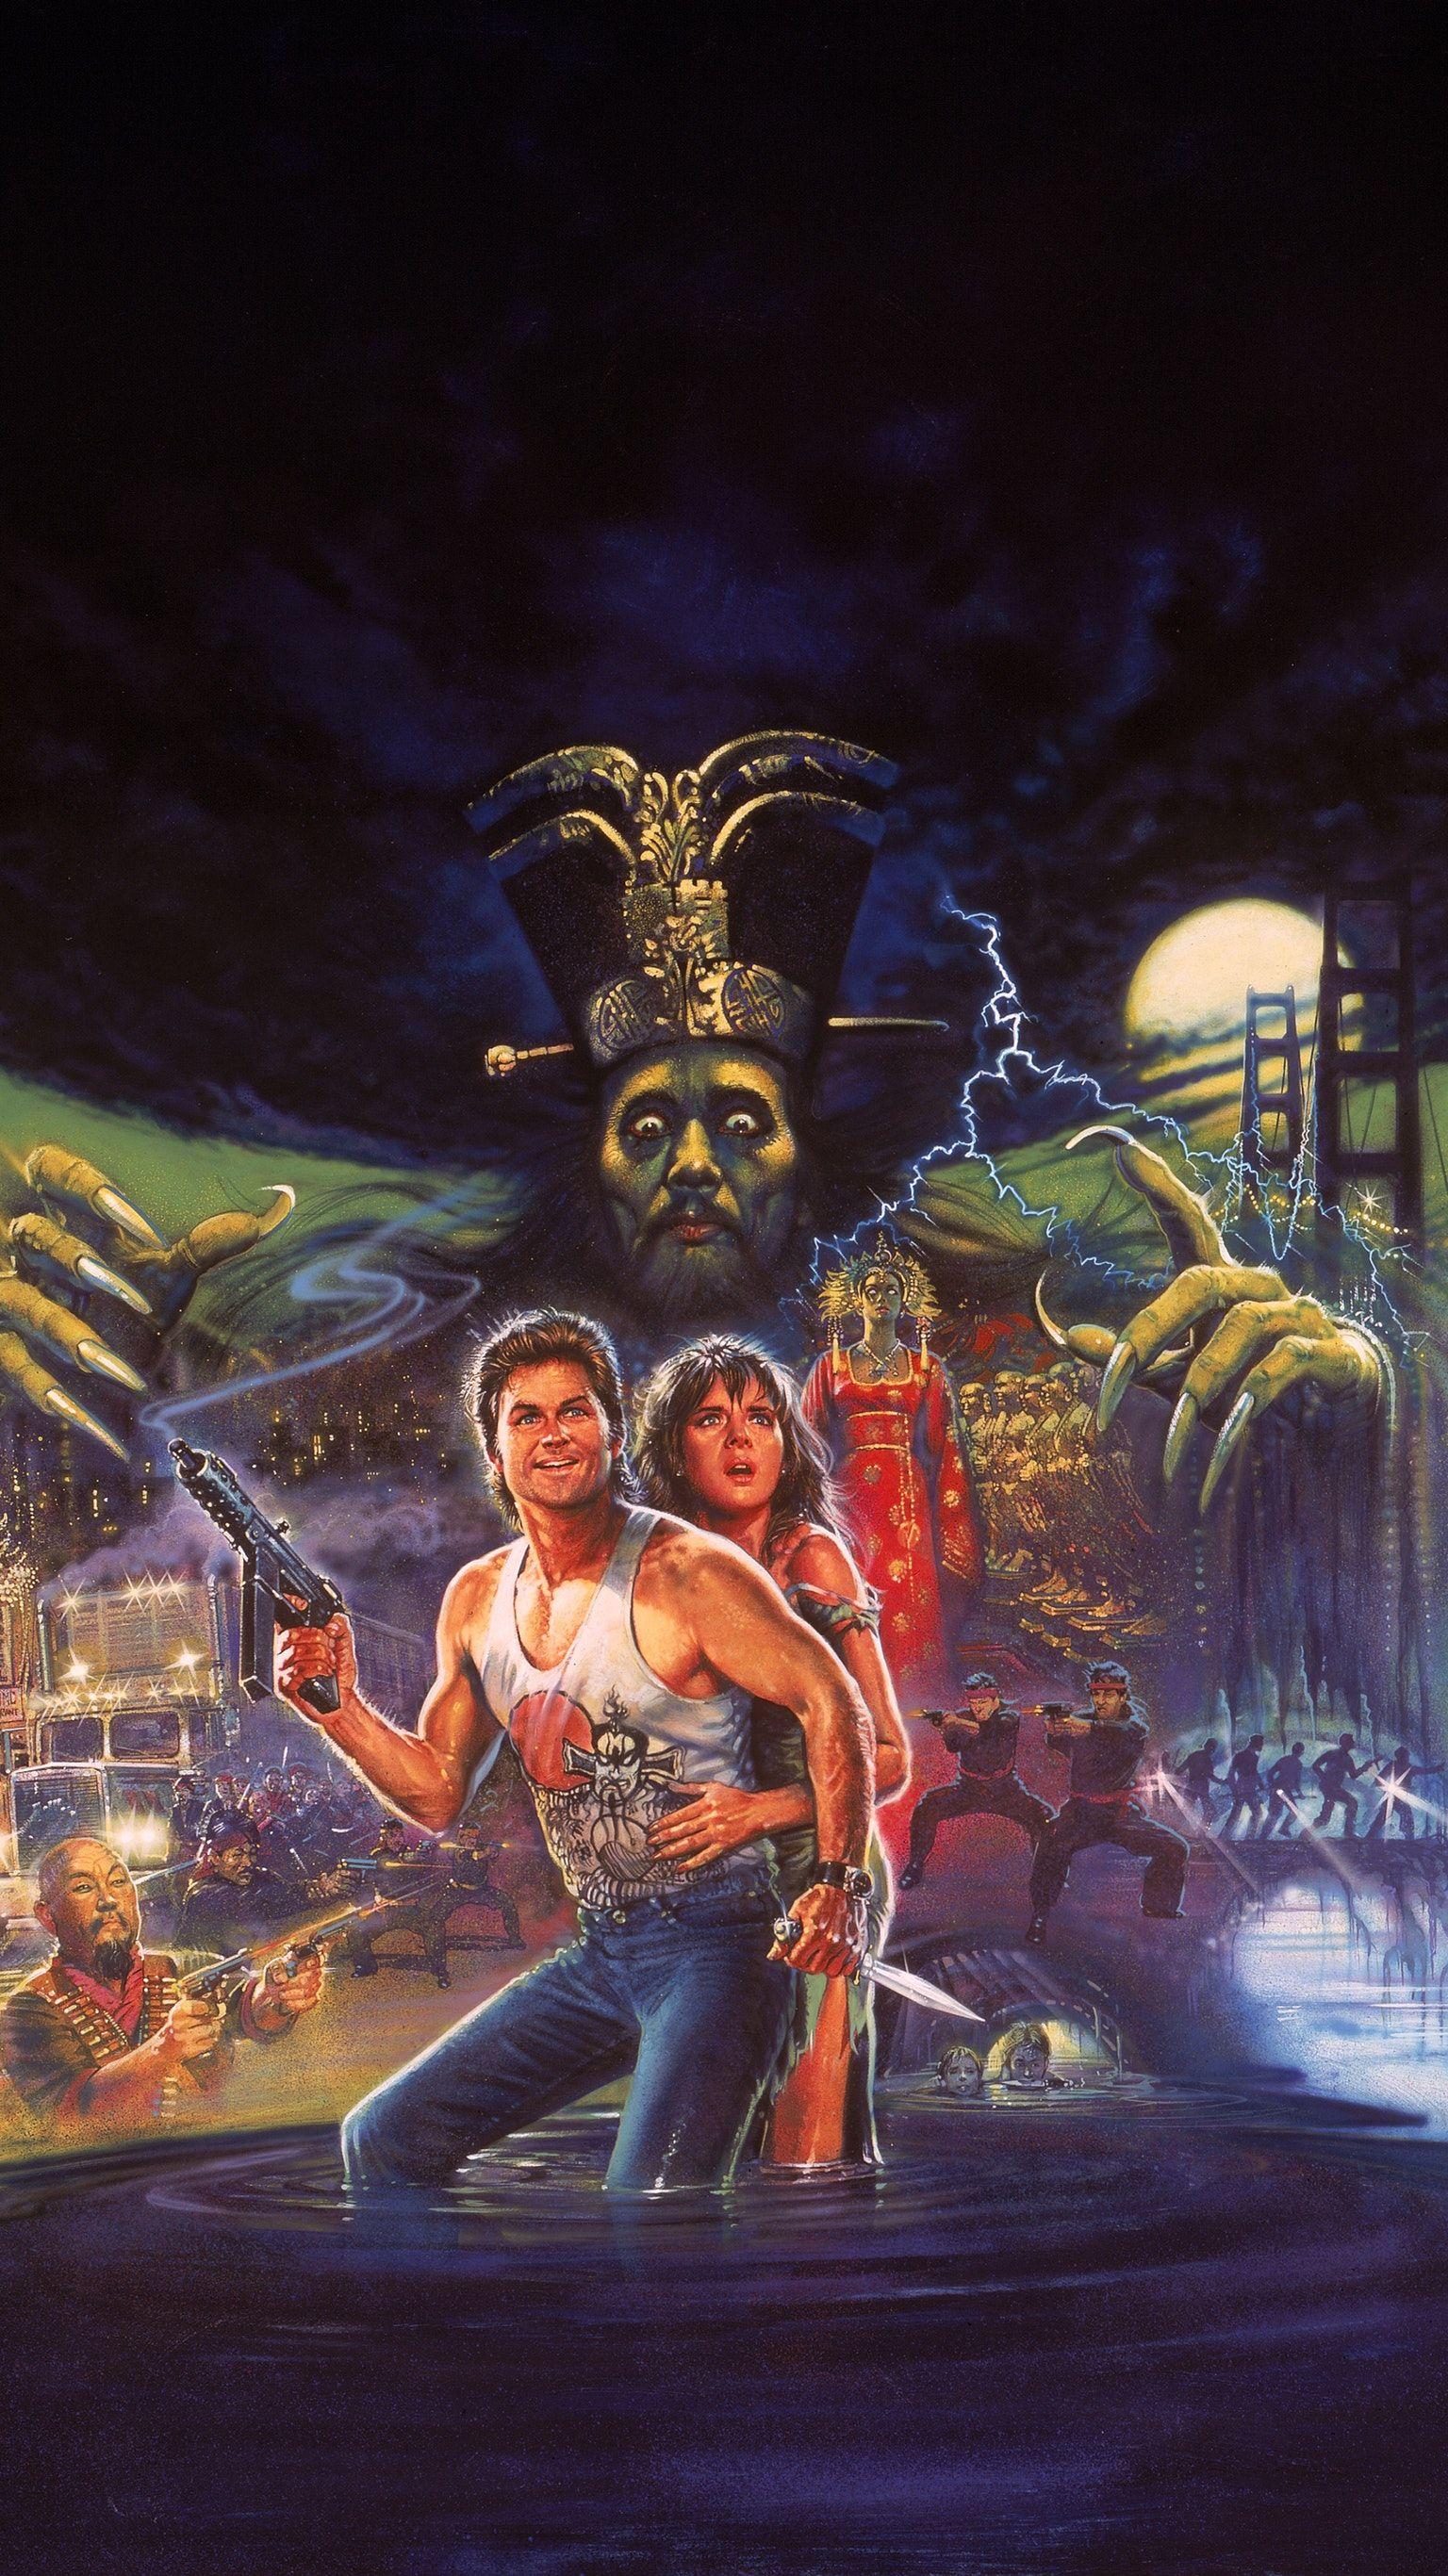 Big Trouble in Little China (1986) Phone Wallpaper. Action